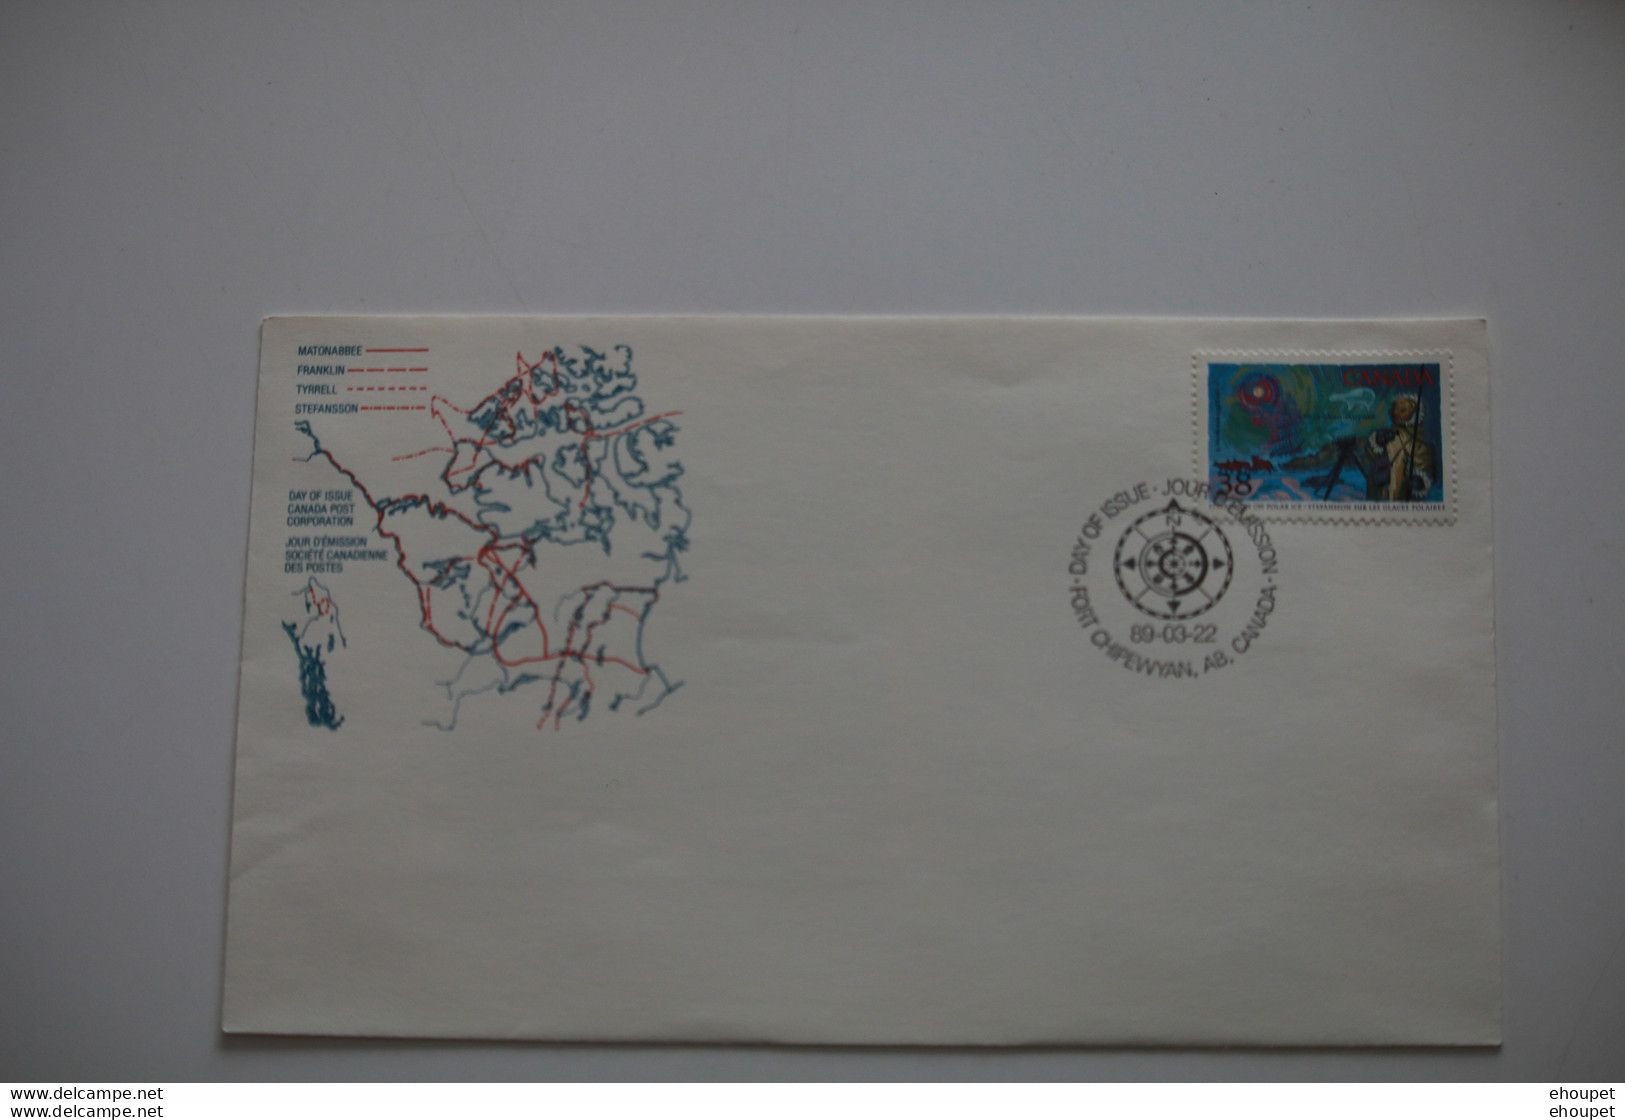 FDC 22 MARS 1989 EXPEDITION STEFENSSON - 1981-1990